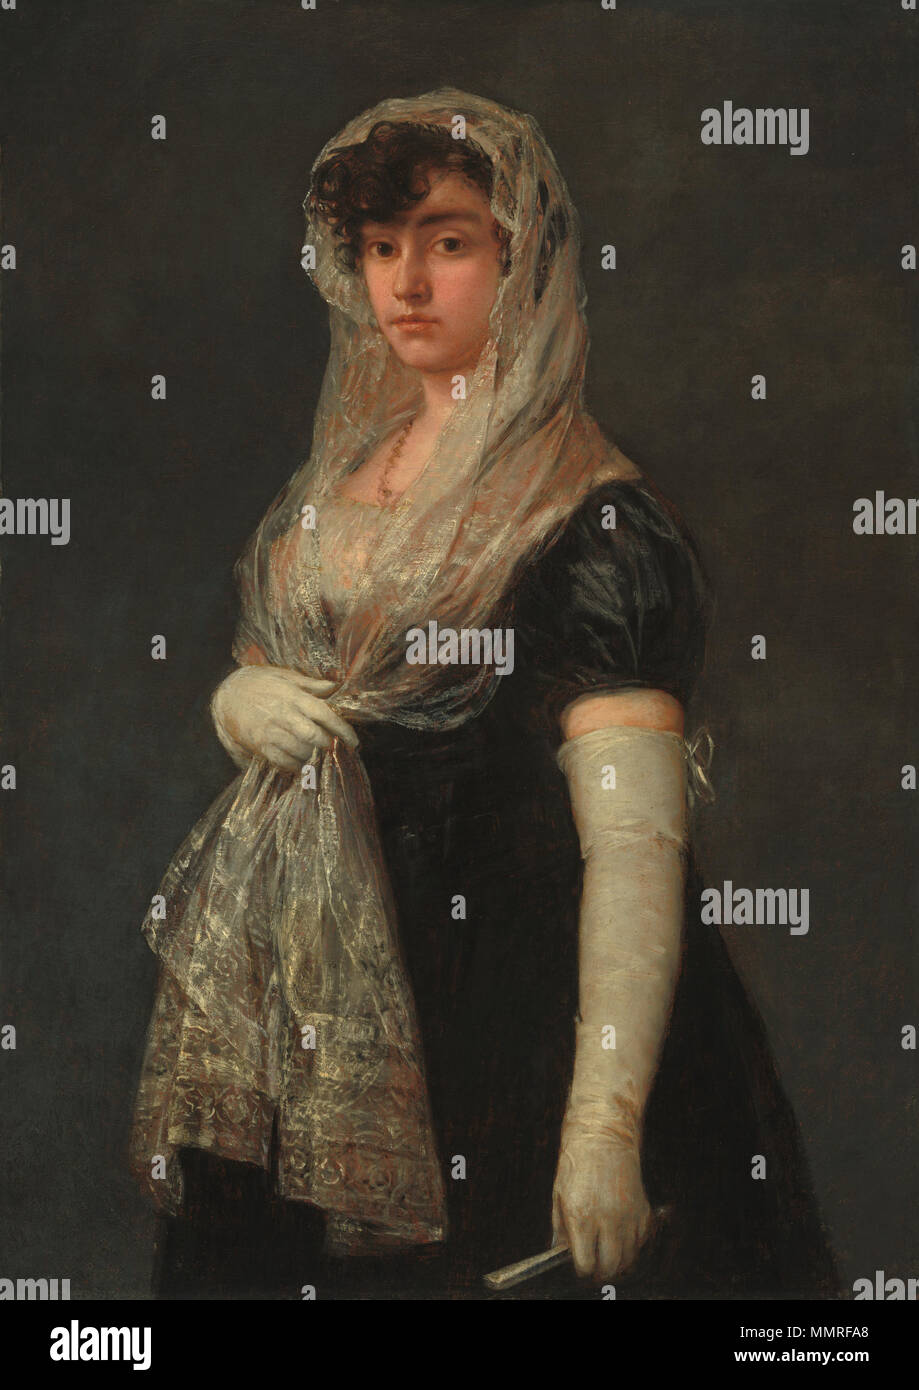 Young Lady Wearing a Mantilla and Basquina Painting; oil on canvas; overall: 109.5 x 77.5 cm (43 1/8 x 30 1/2 in.) framed: 125.4 x 93.6 x 6 cm (49 3/8 x 36 7/8 x 2 3/8 in.); Goya - Joven dama con mantilla y basquiña Stock Photo